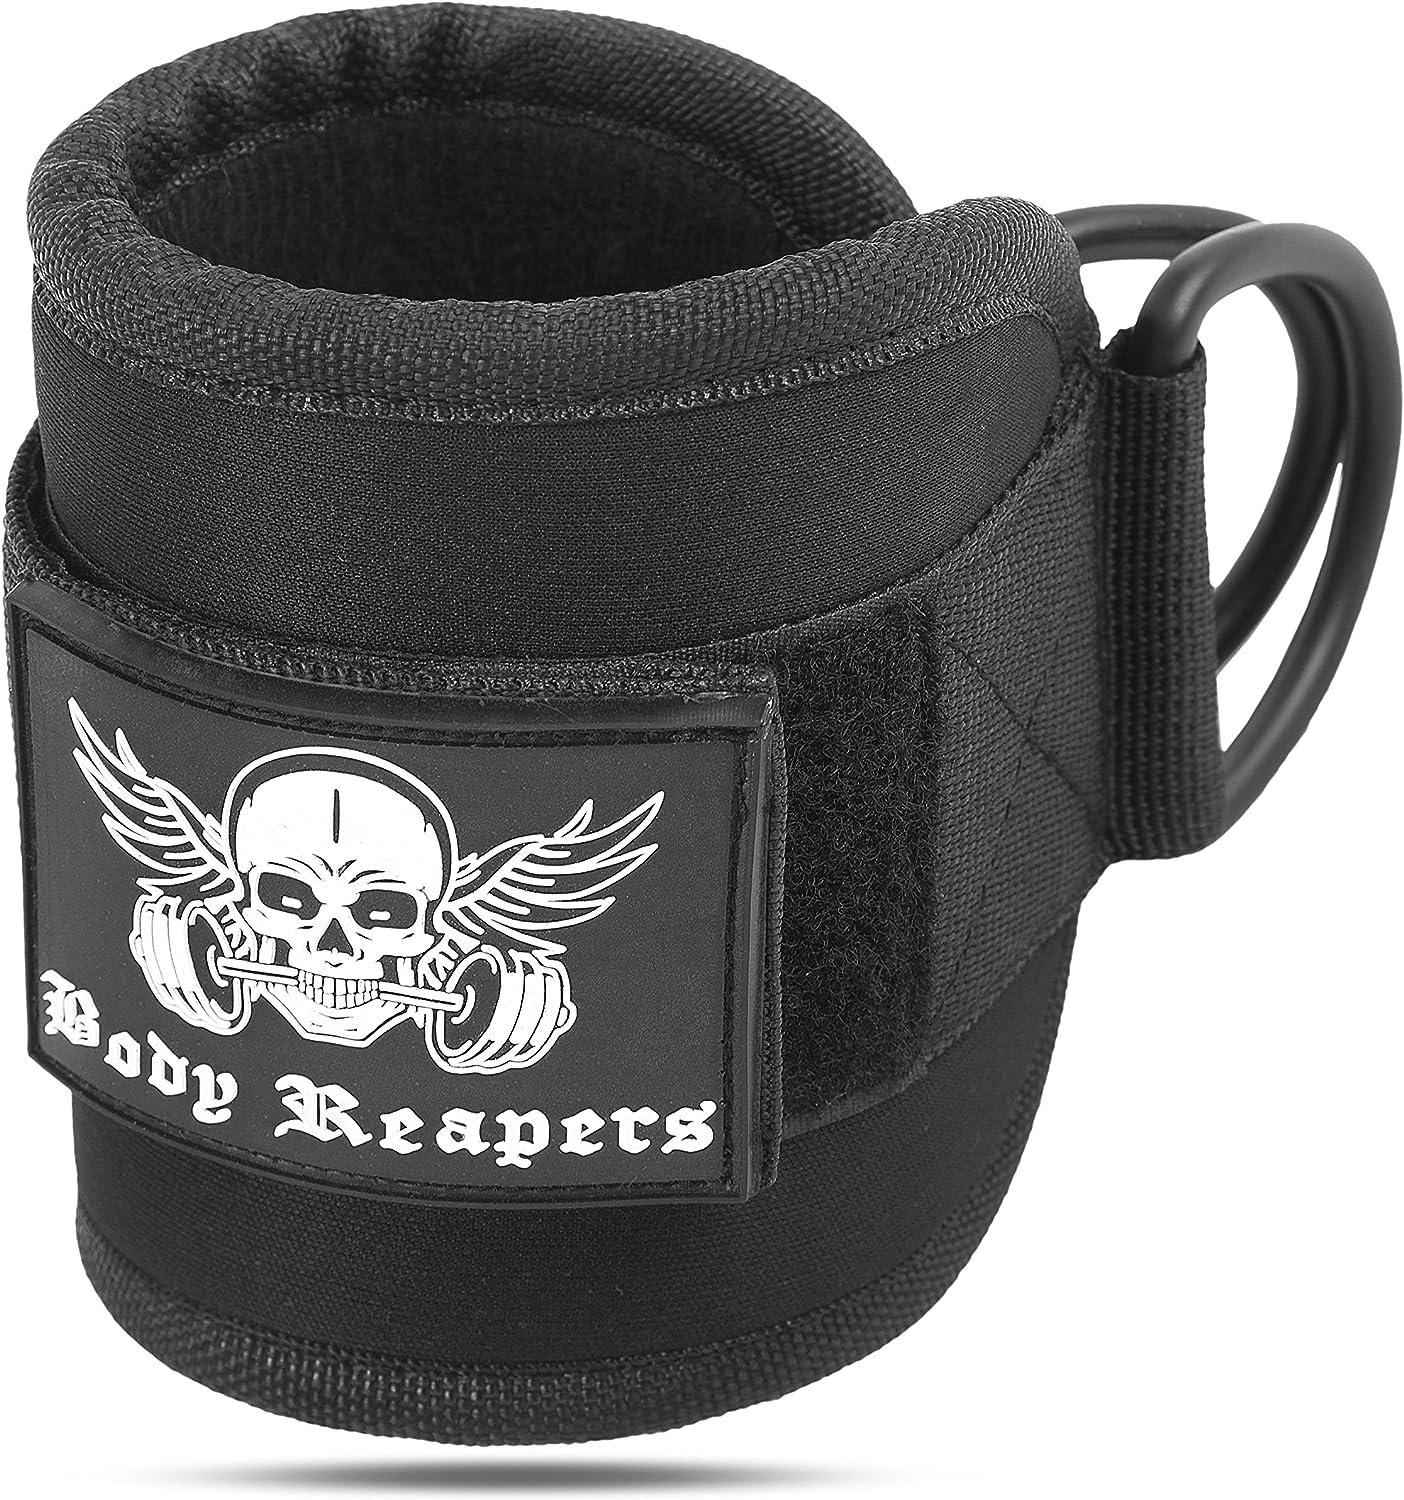 Body Reapers Gym Ankle Strap for Cable Machine, Adjustable Ankle